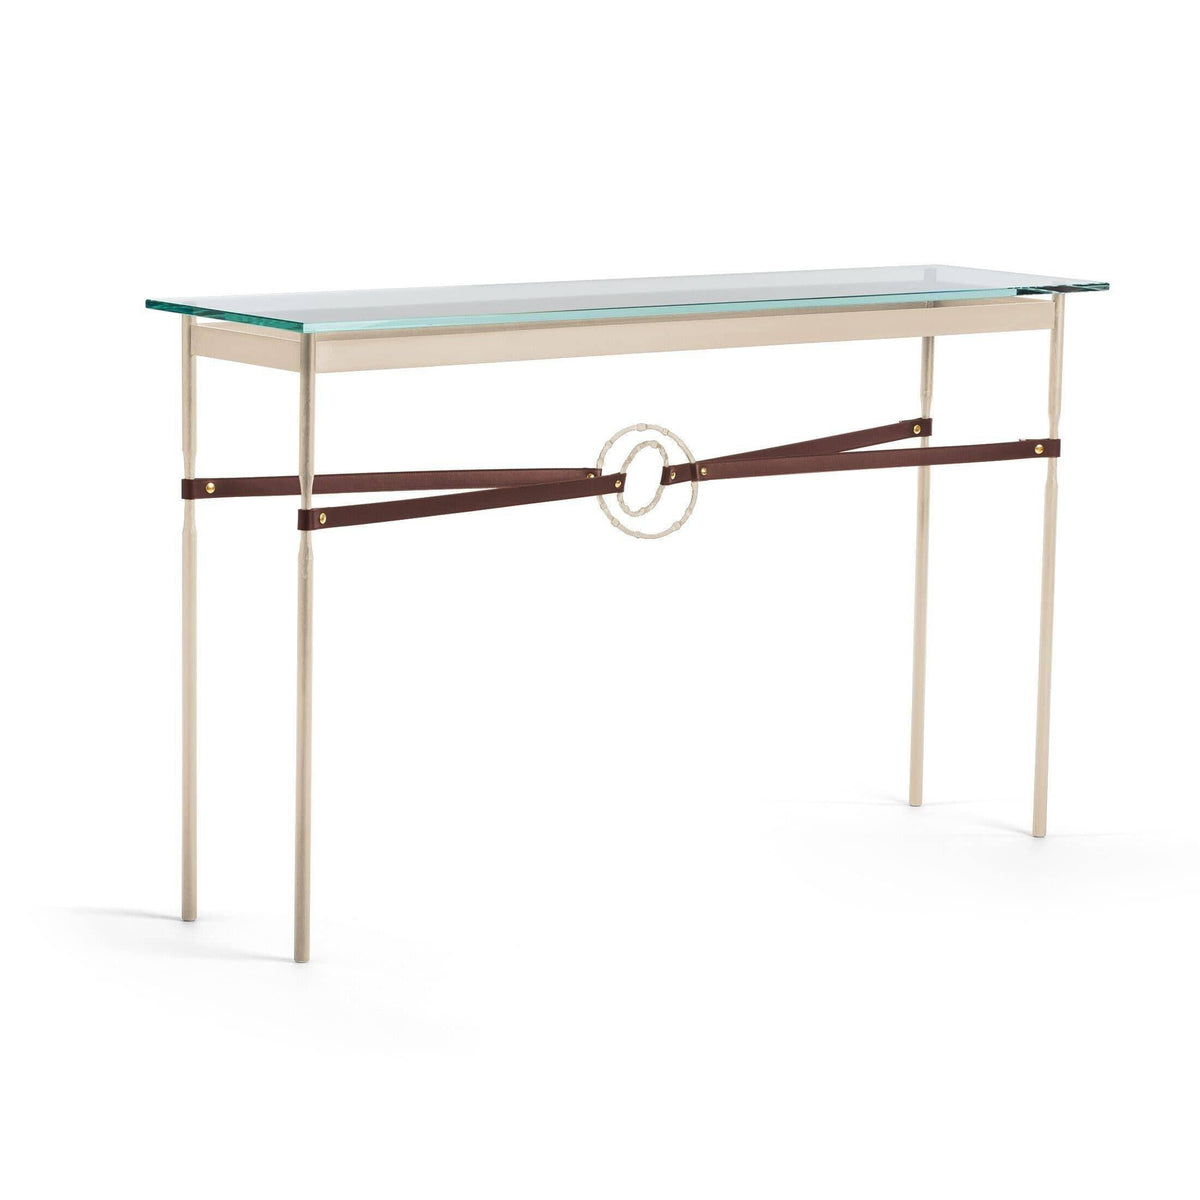 Hubbardton Forge - Equus Brown Leather Console Table - 750118-84-84-LB-VA0714 | Montreal Lighting & Hardware